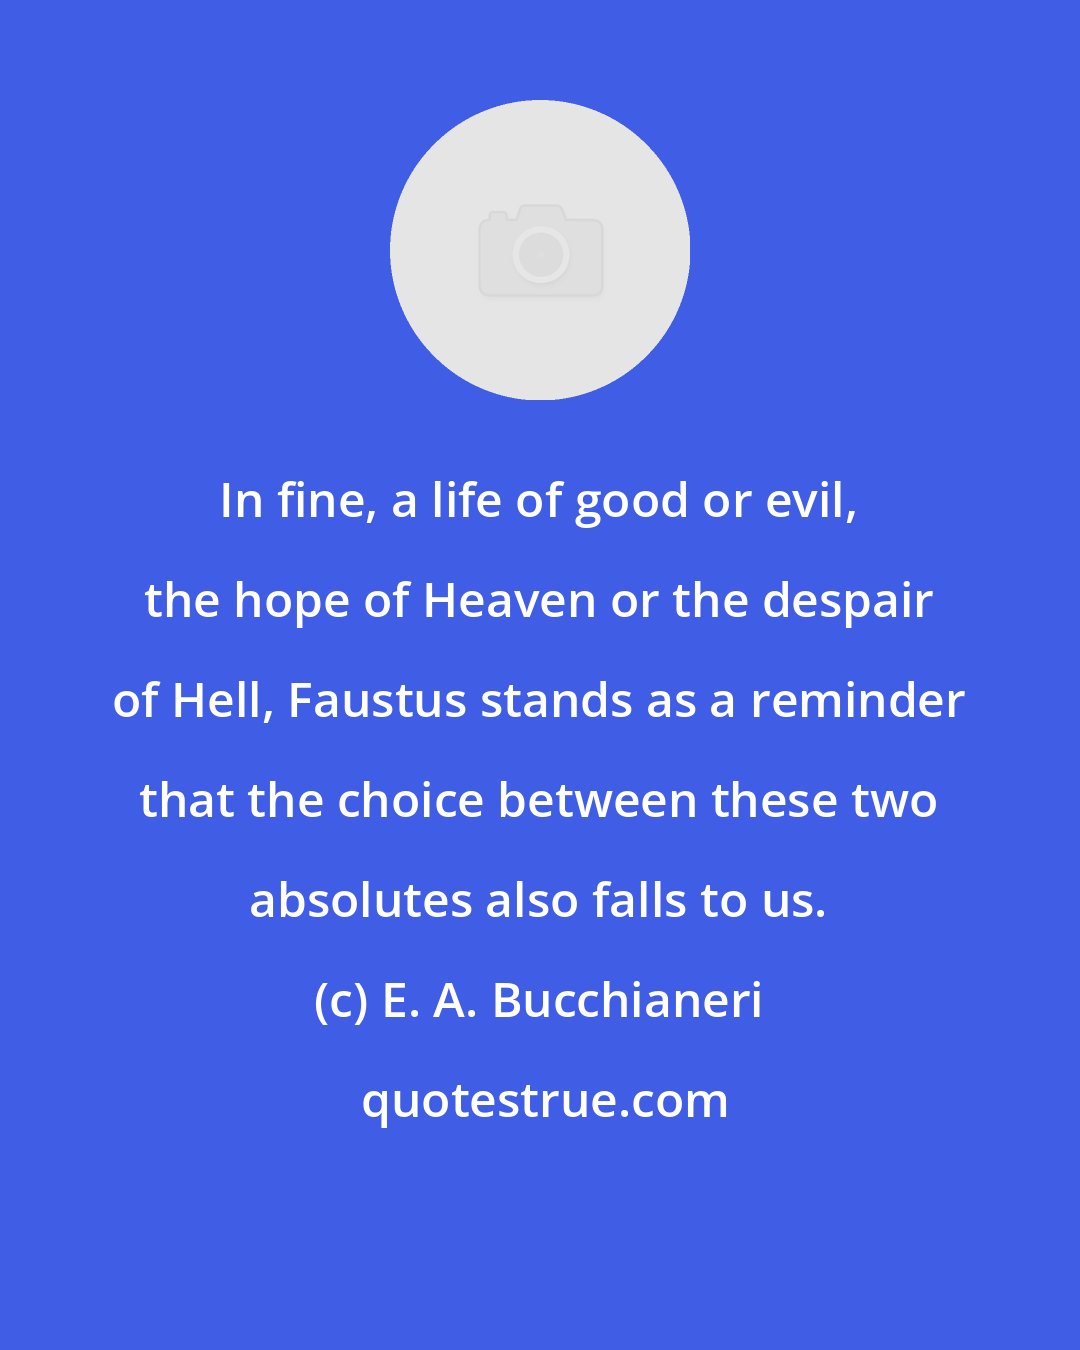 E. A. Bucchianeri: In fine, a life of good or evil, the hope of Heaven or the despair of Hell, Faustus stands as a reminder that the choice between these two absolutes also falls to us.